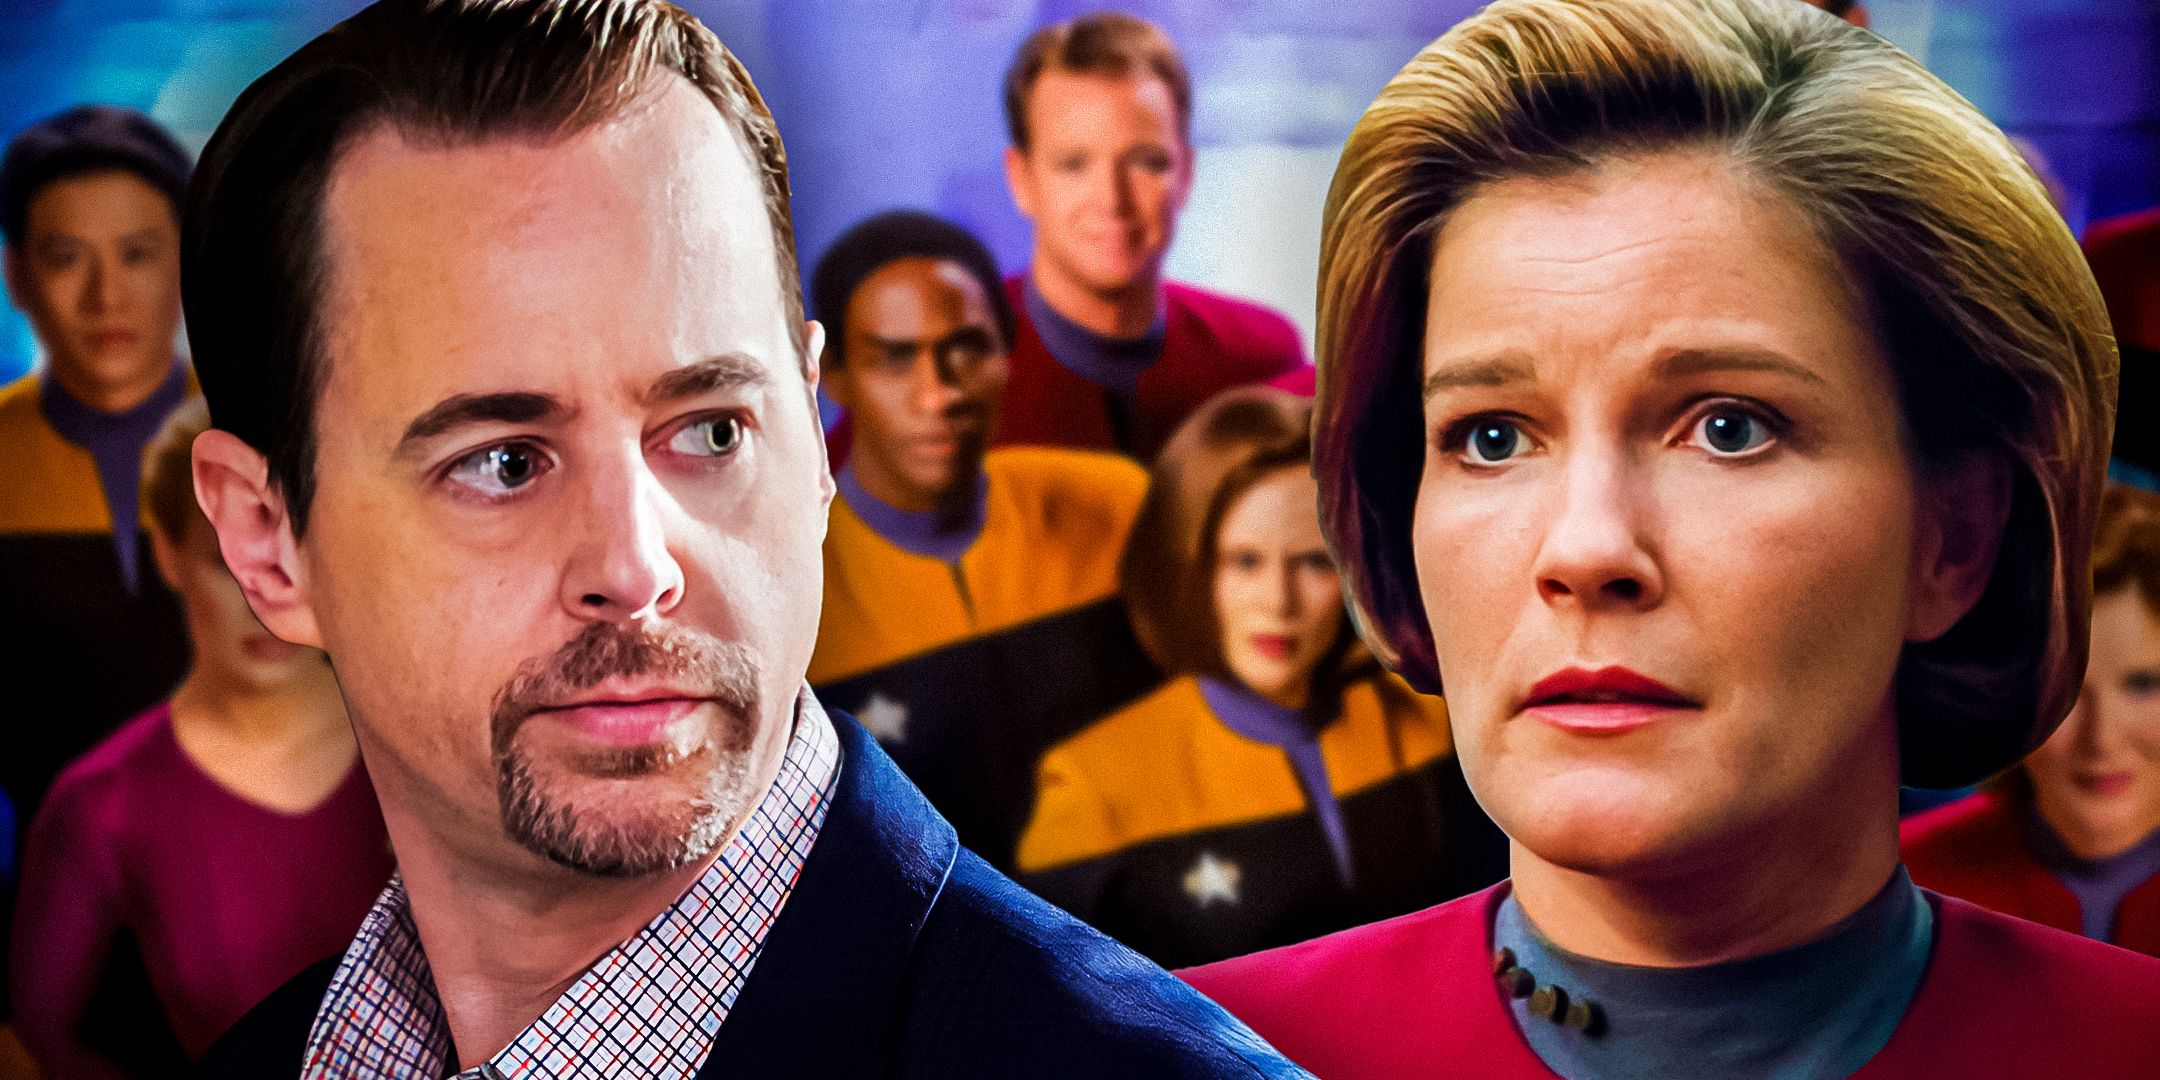 (Sean-Murray-as-Timothy-McGee)-from-NCIS-and-(Kate-Mulgrew-as-Capt.-Kathryn-Janeway)-from-Star-Trek-Voyager